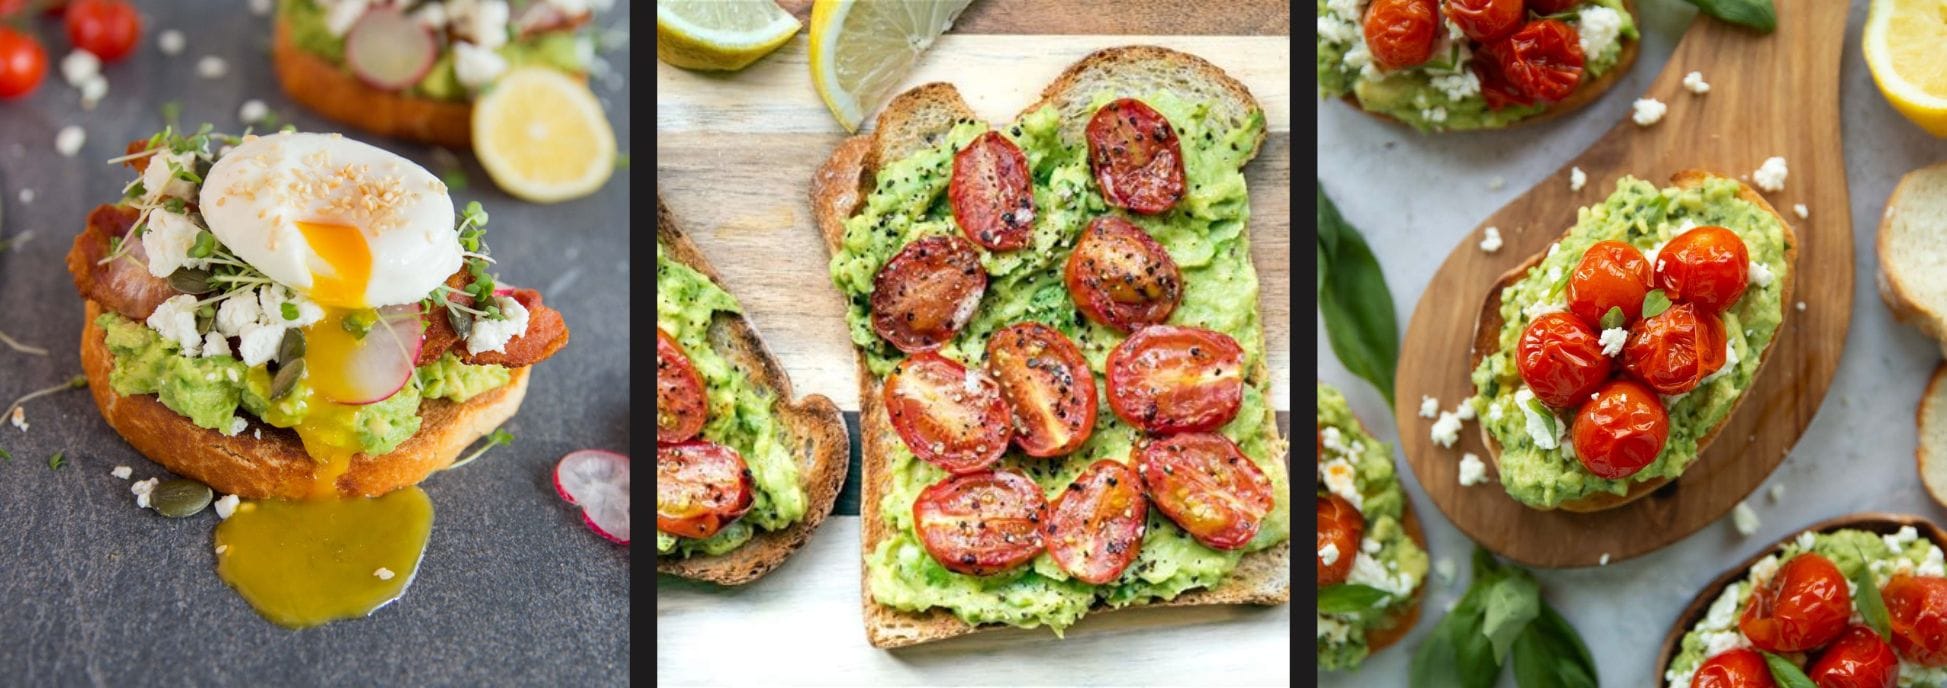 Avocado Toast with a Twist: Brunch in a Crunch